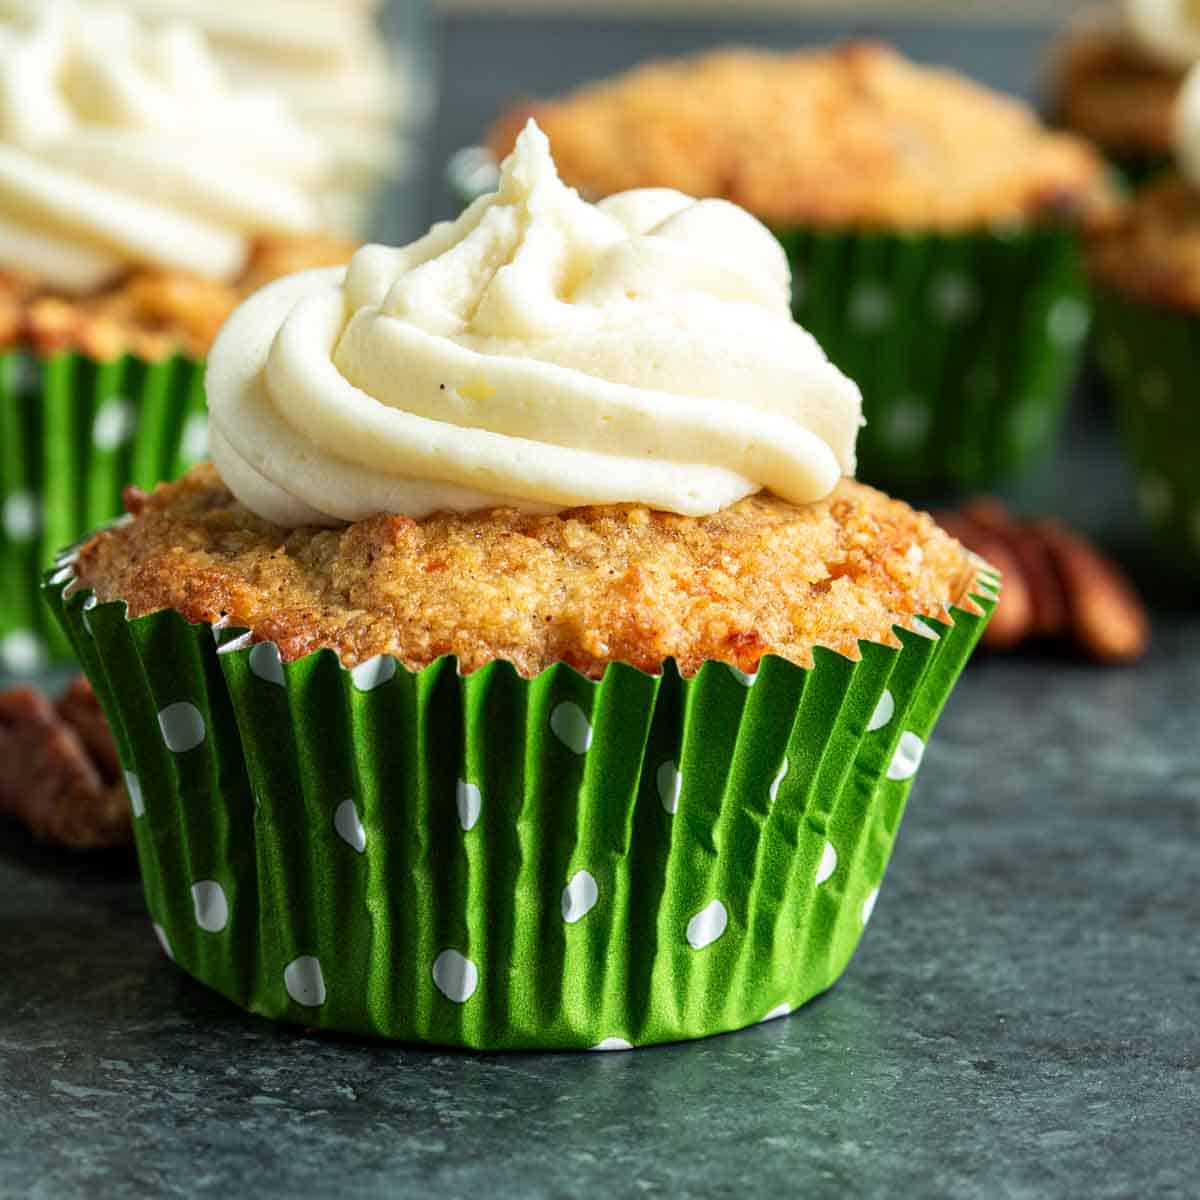 A freshly baked Keto Carrot Cake with cream cheese frosting in a green cupcake liner.